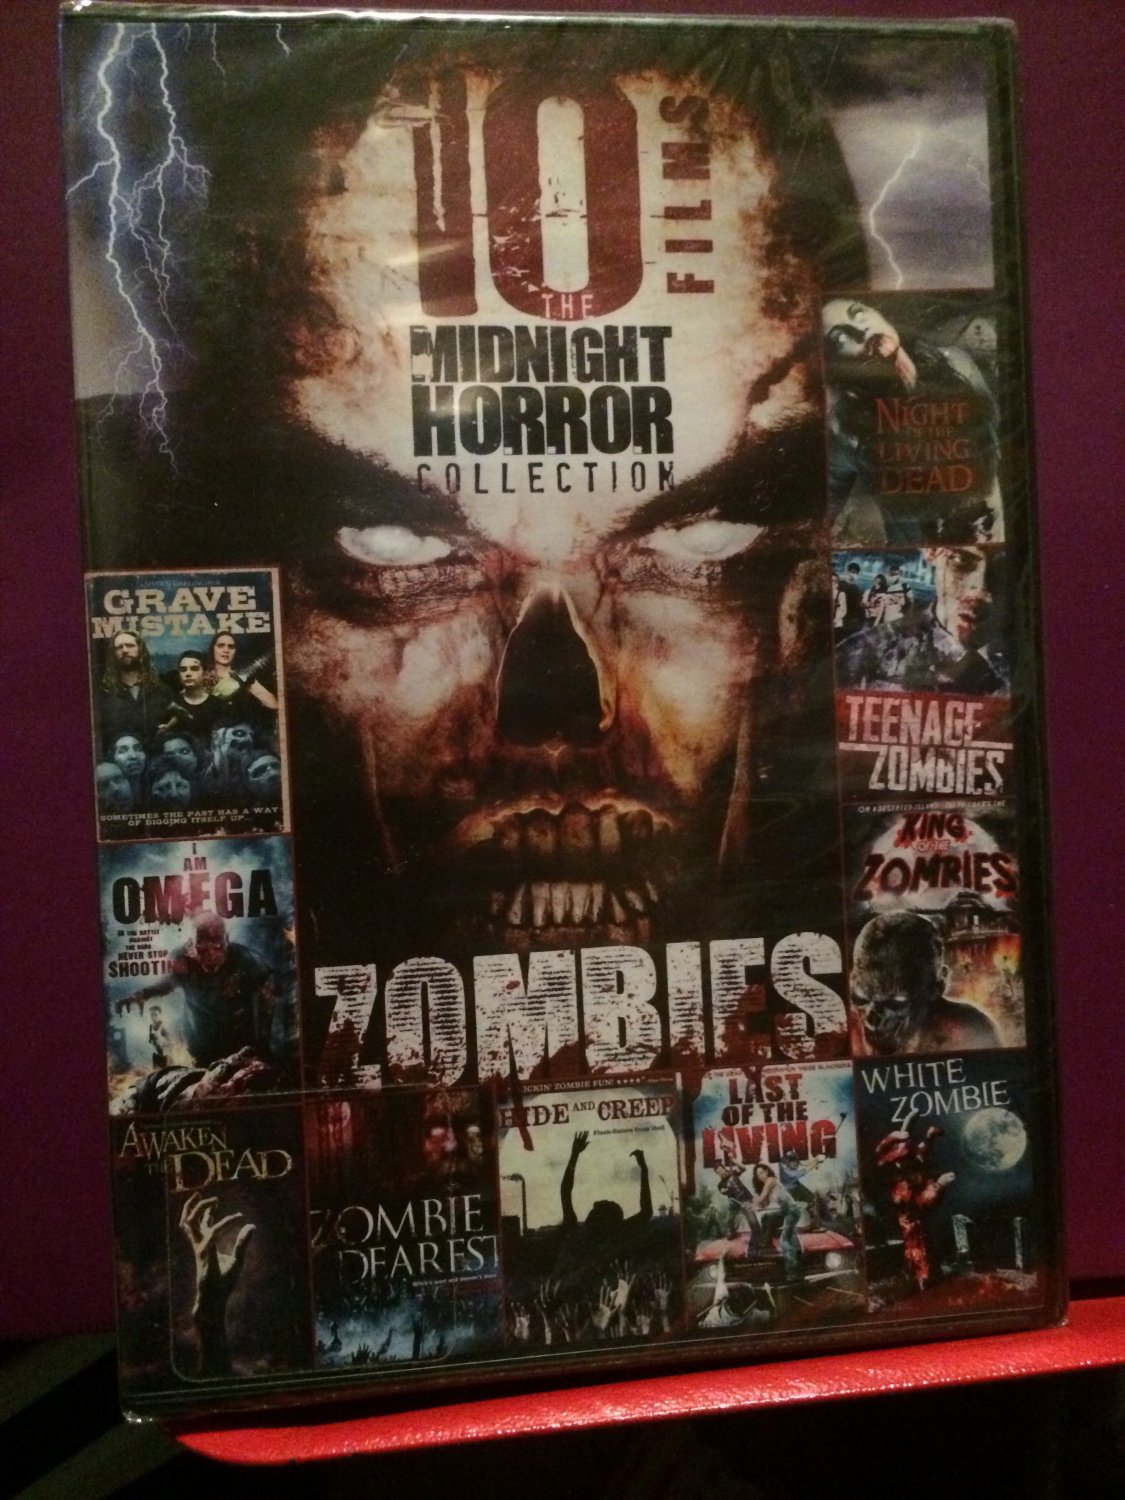 10 films the midnight horror collection zombies